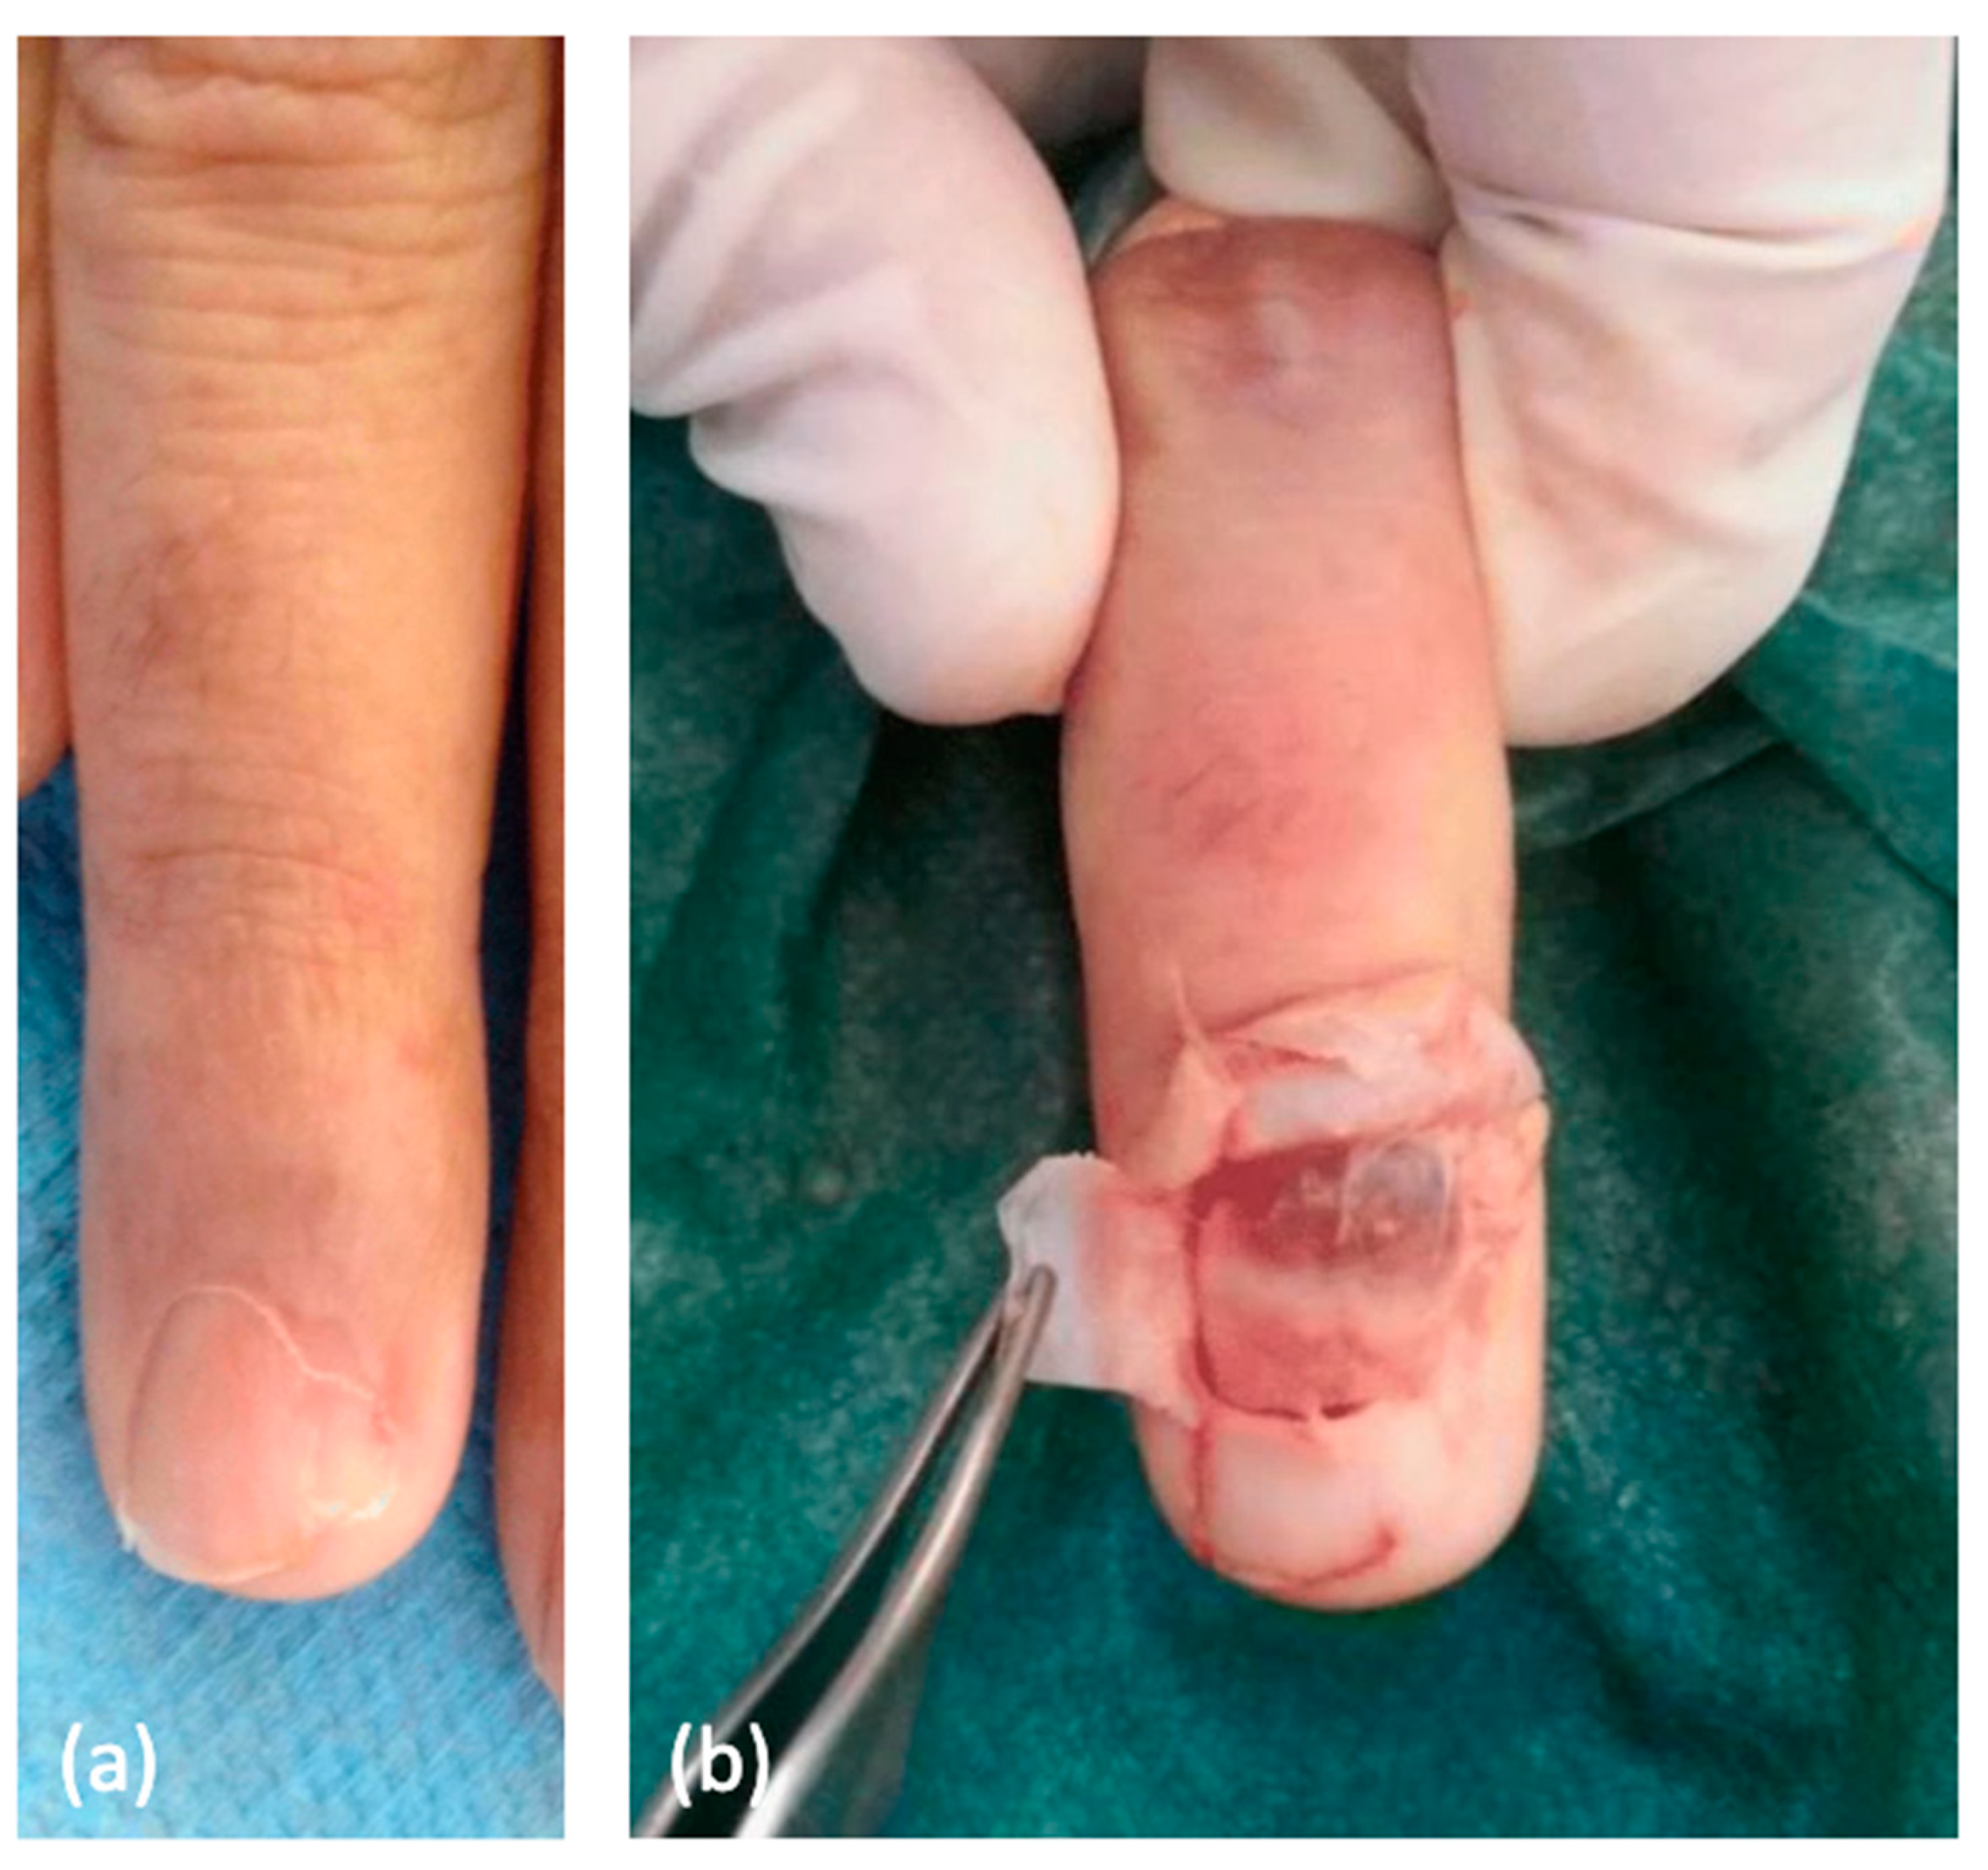 Rare Localisation of Glomus Tumor under greater Toenail Bed, presenting  with Pain for a Decade-A Case Report